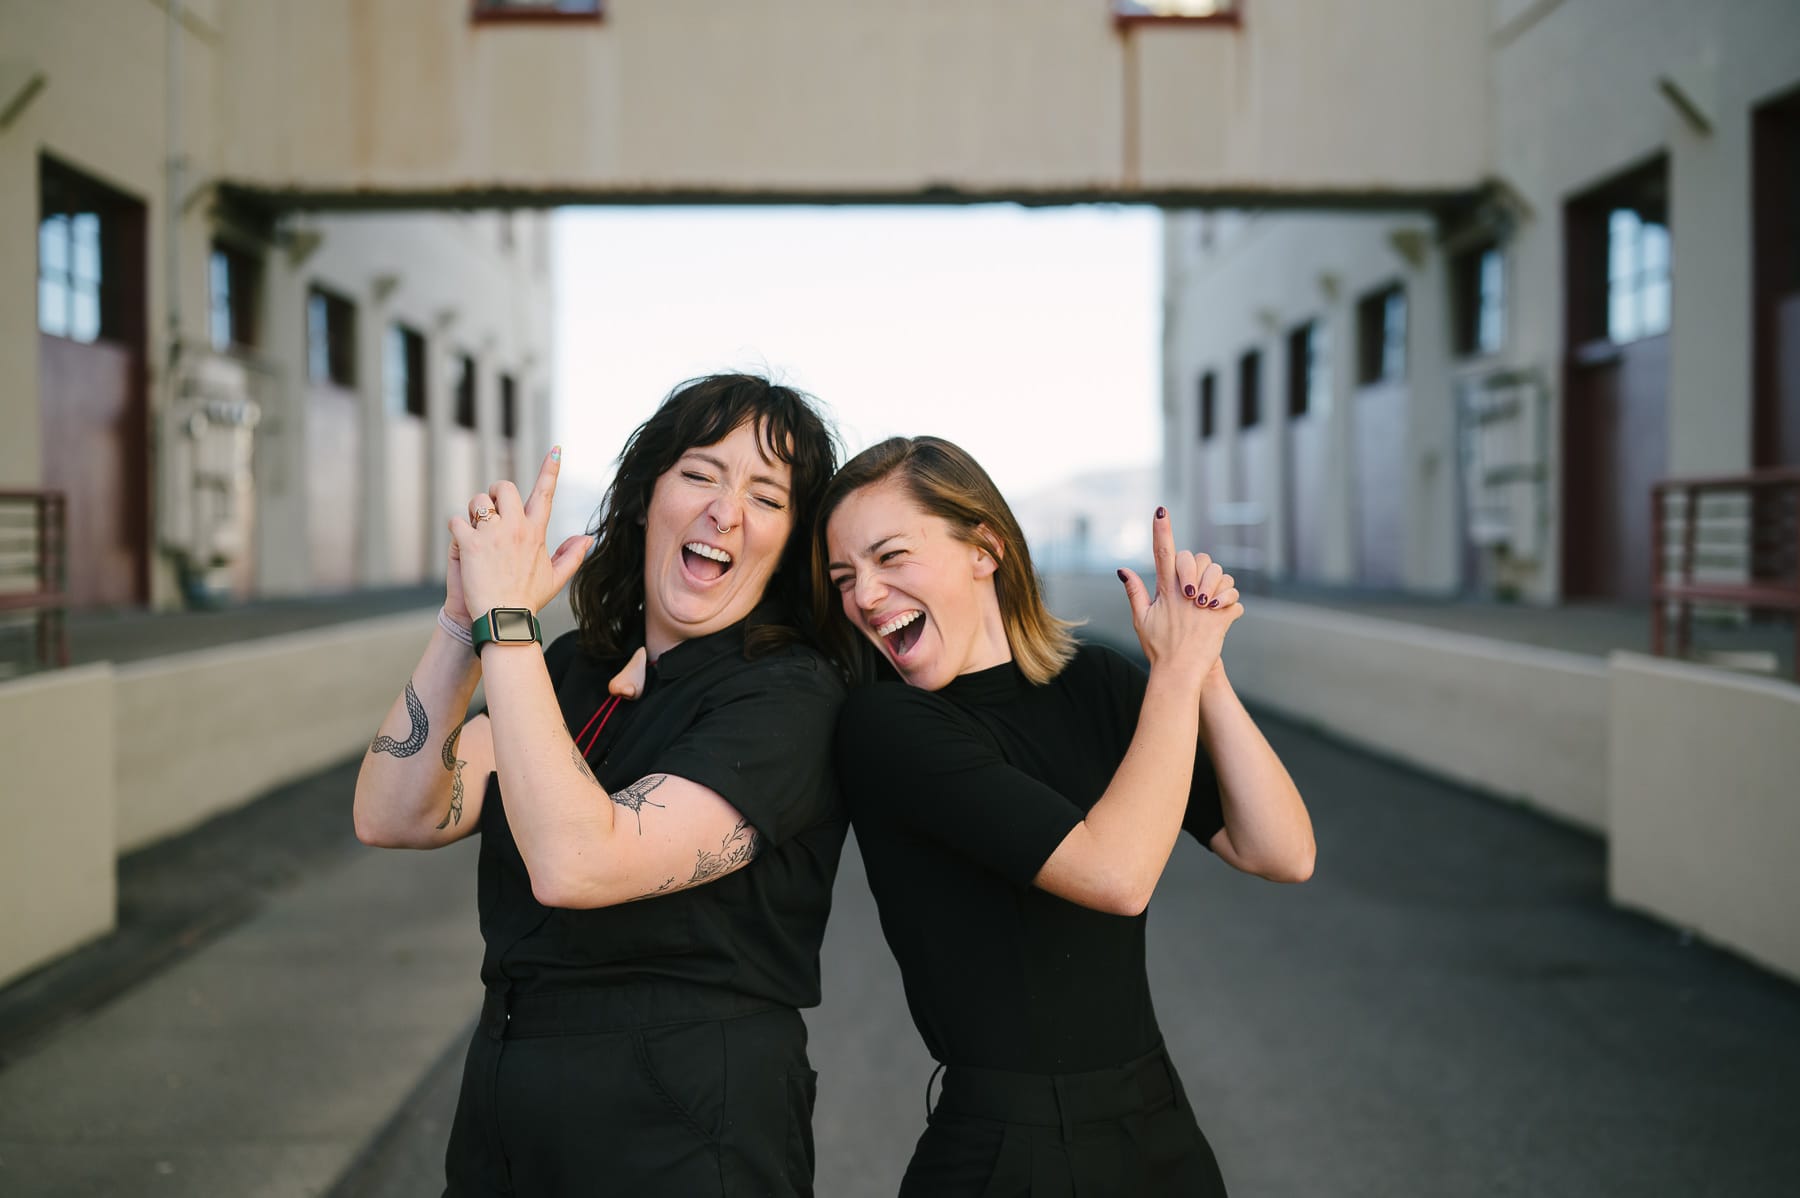 Event planner, Willa Via, and her planning assistant, Jennifer Hassen striking a goofy pose at a wedding in Fort Mason.